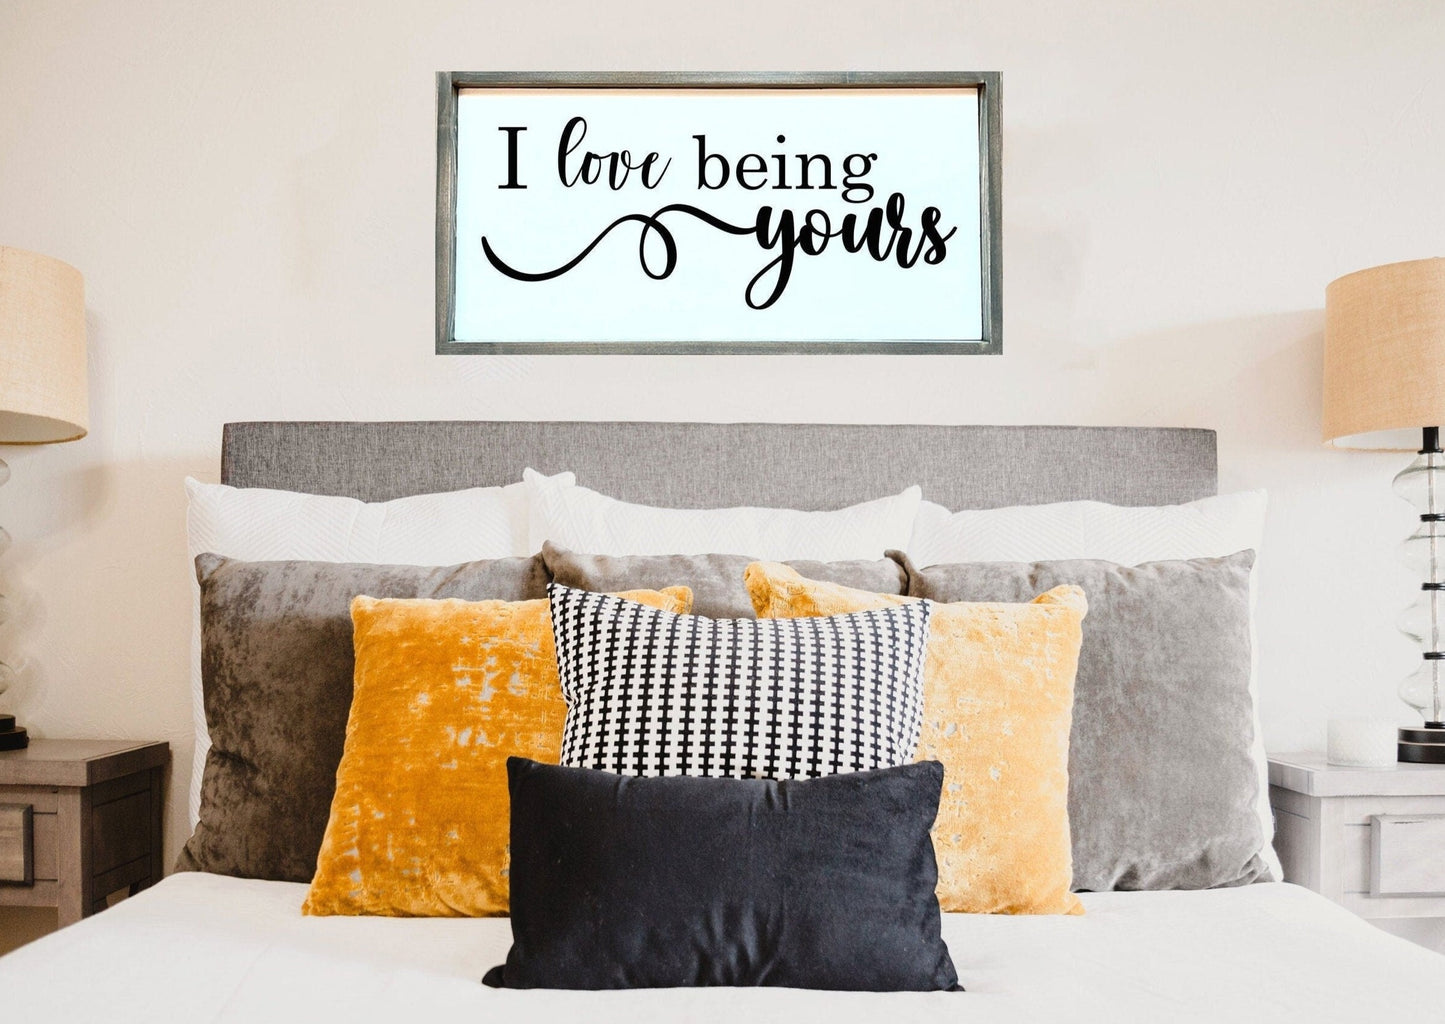 I love being yours bedroom wood sign.